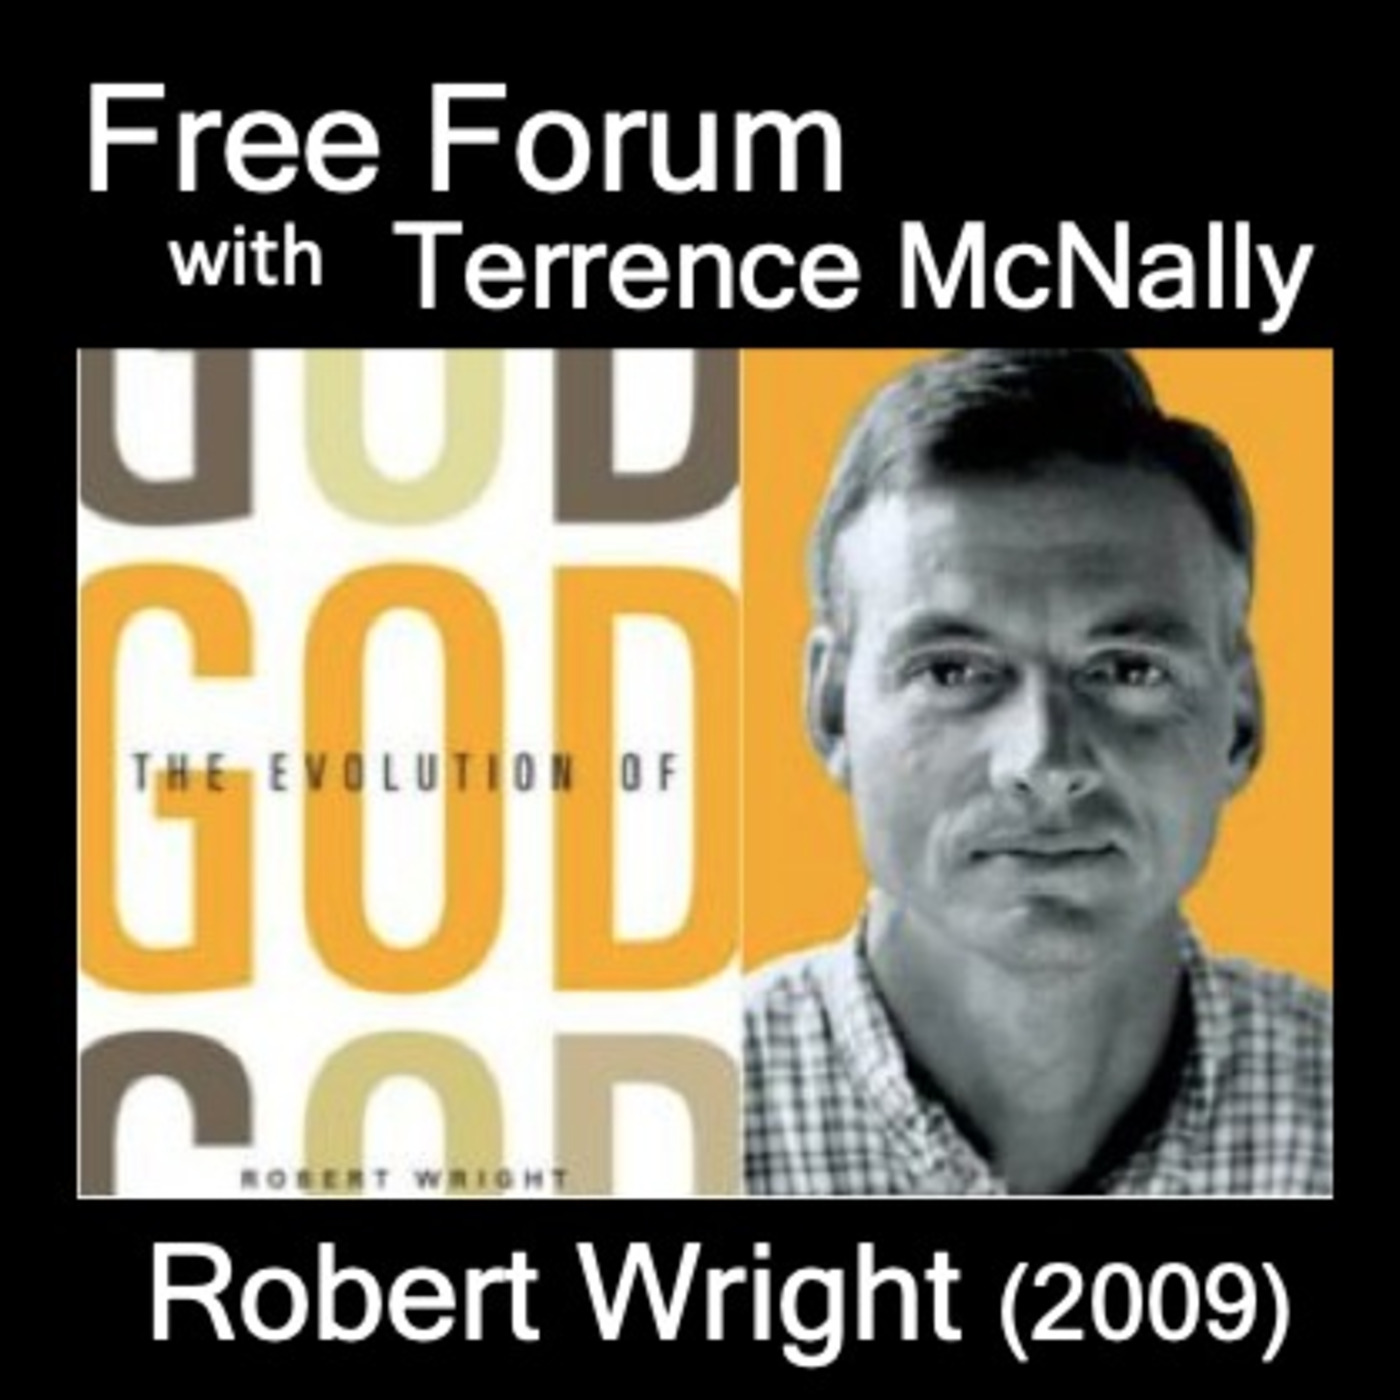 ROBERT WRIGHT-Evolution of God-How God’s personality changed with ancient politics